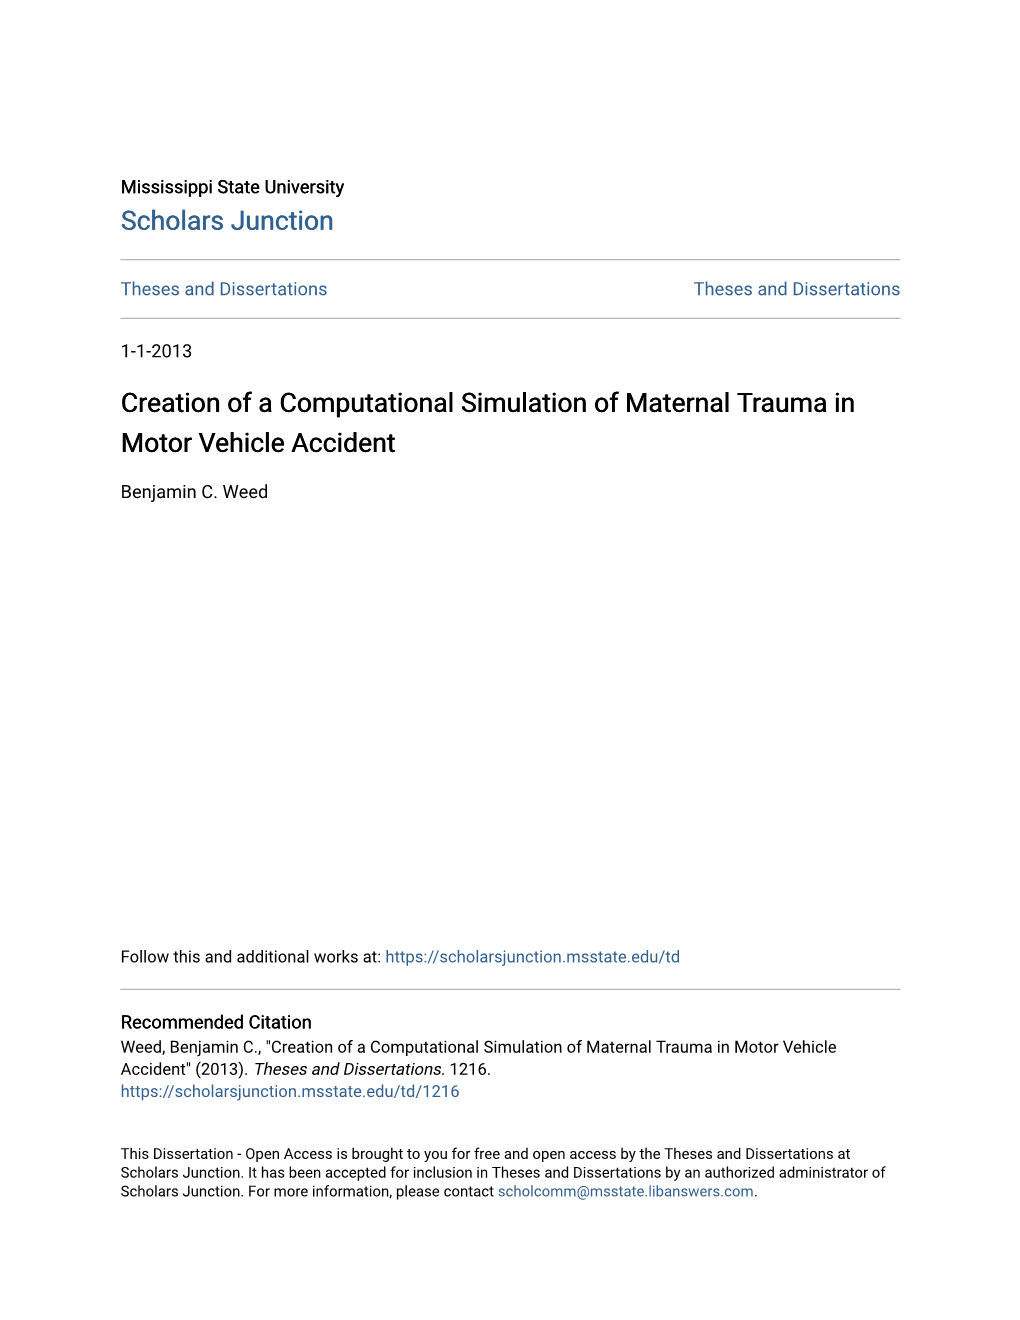 Creation of a Computational Simulation of Maternal Trauma in Motor Vehicle Accident